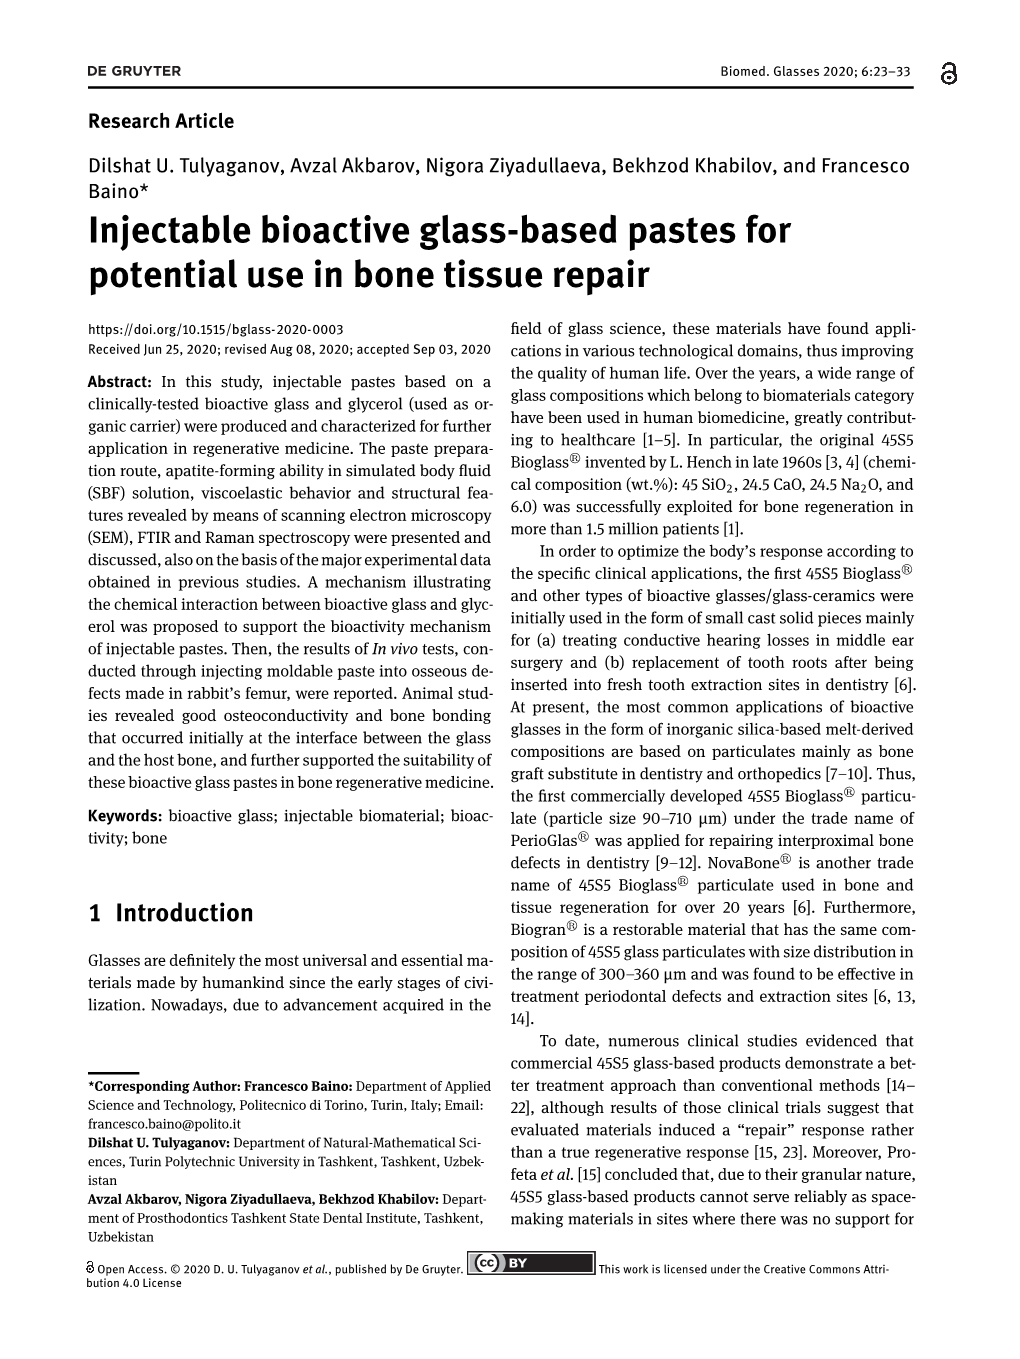 Injectable Bioactive Glass-Based Pastes for Potential Use in Bone